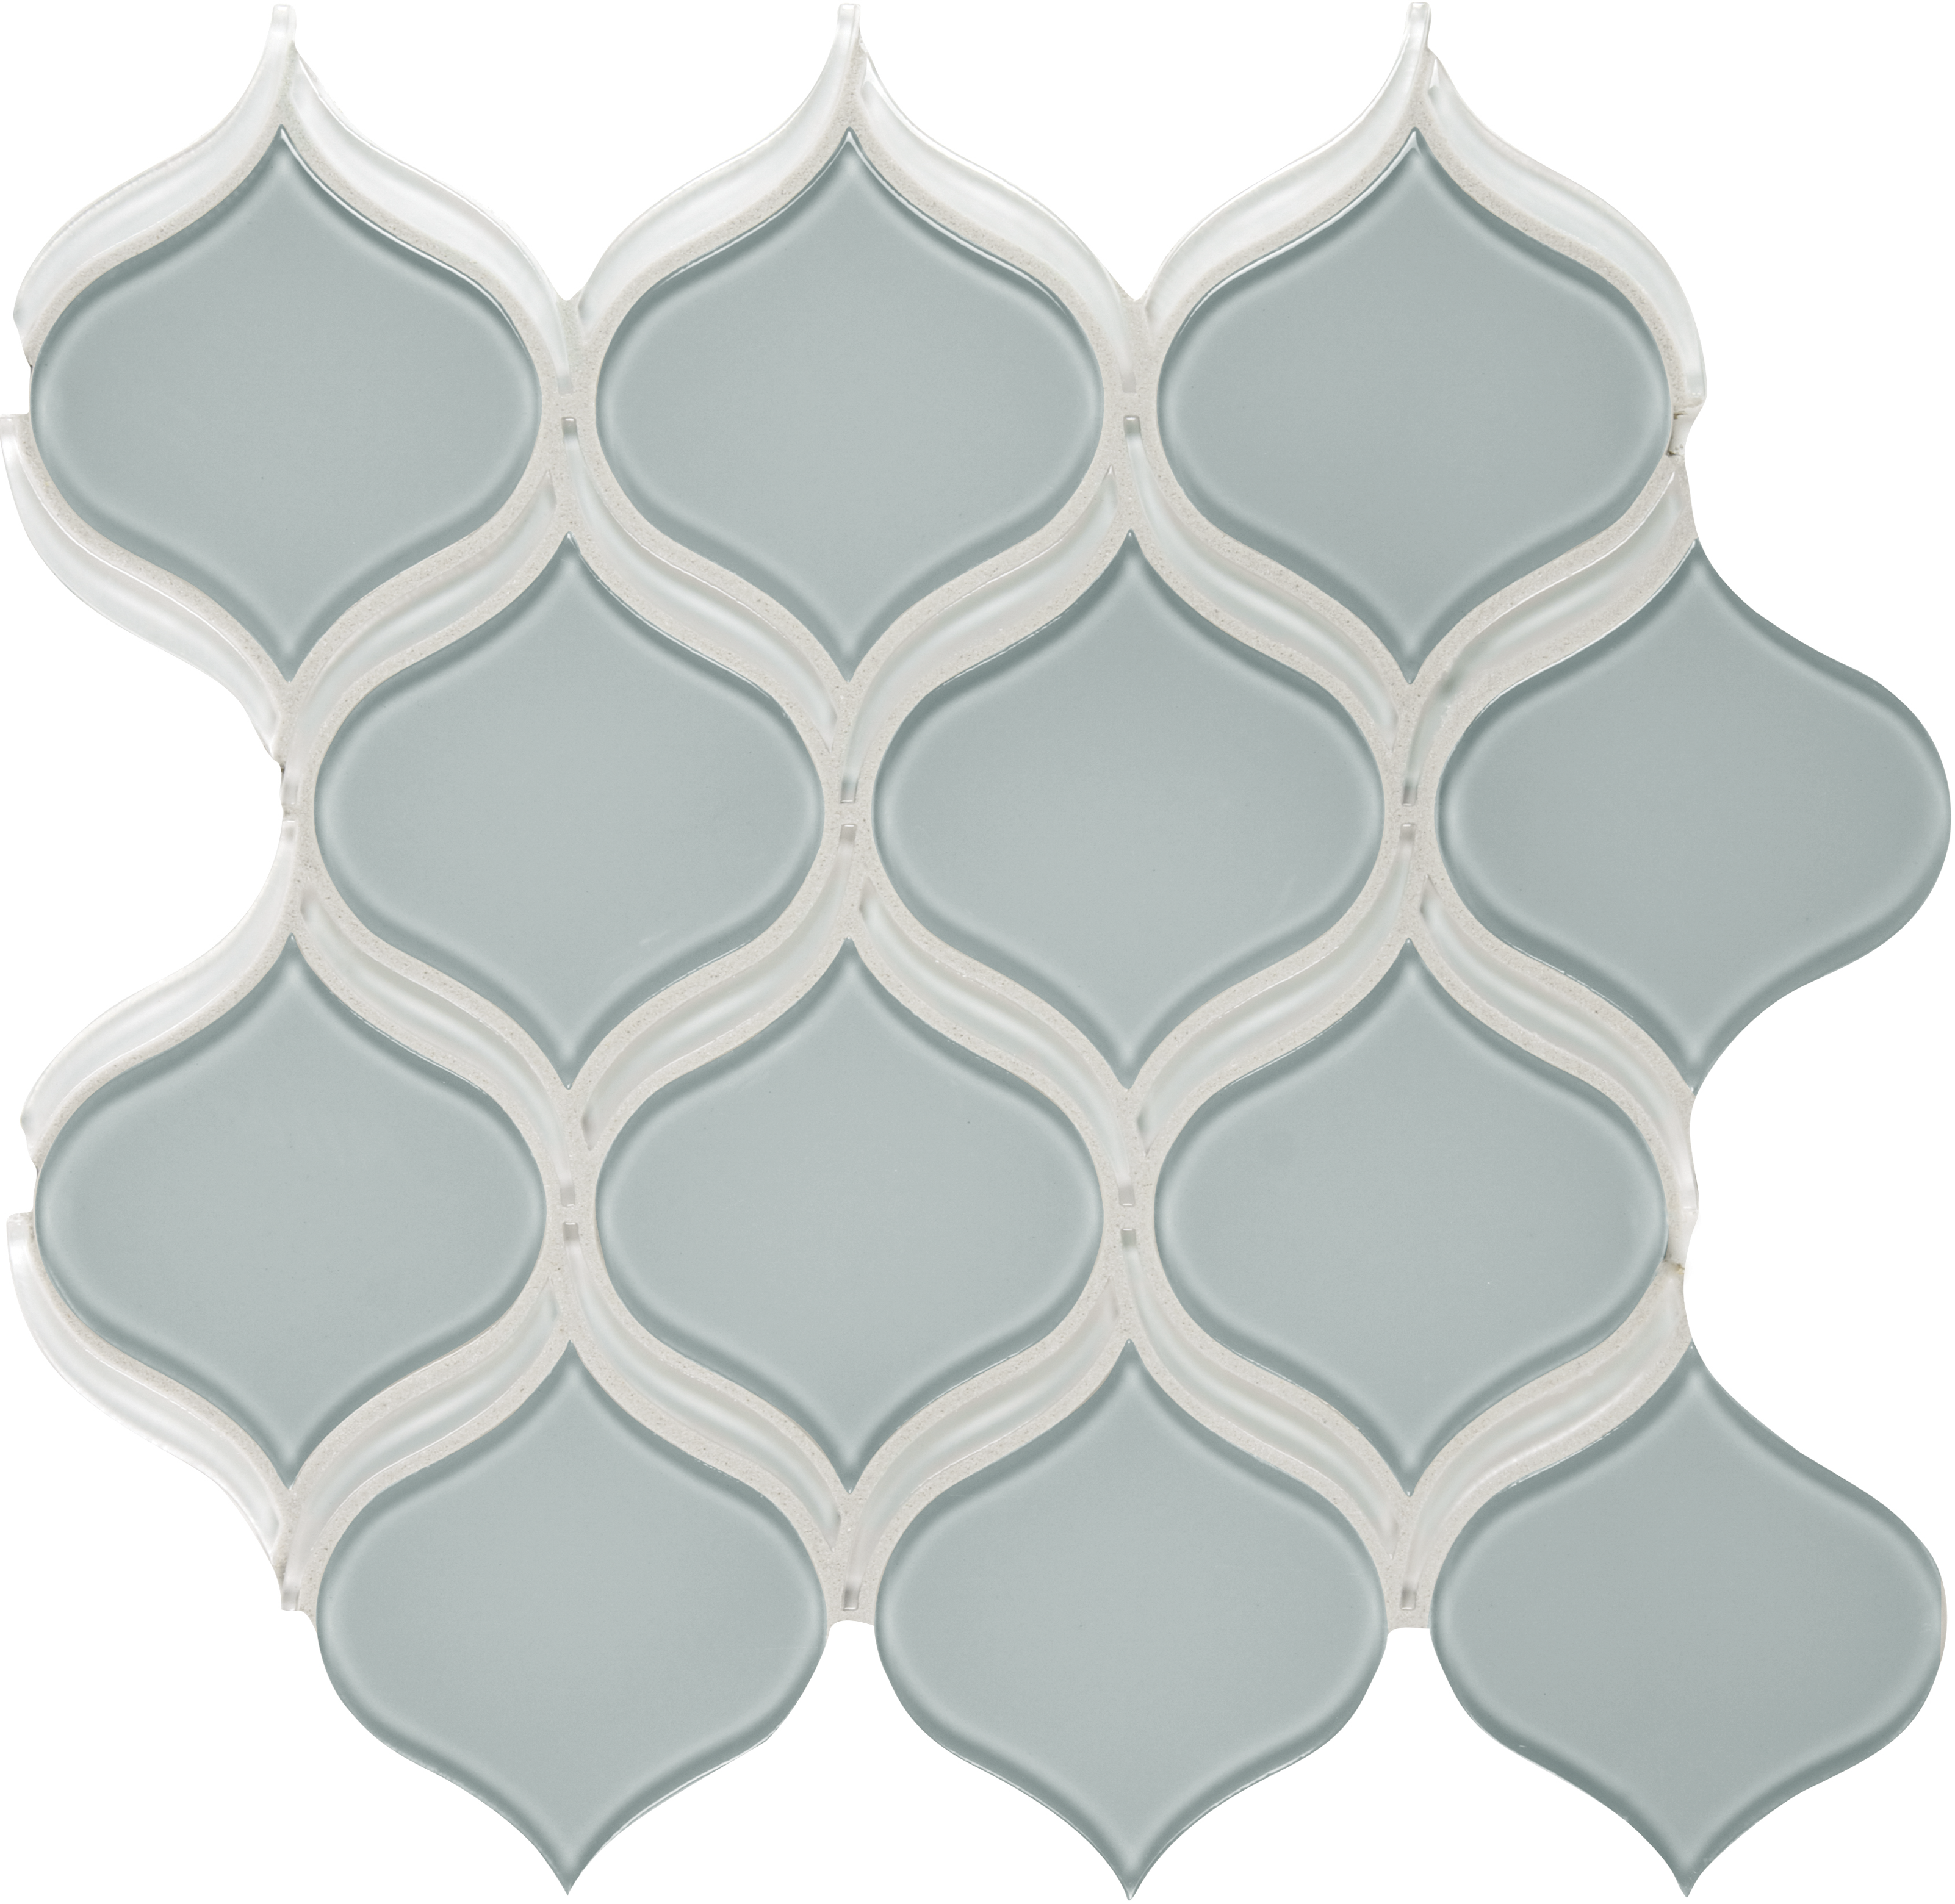 cloud arabesque pattern fused glass mosaic from element anatolia collection distributed by surface group international glossy finish rounded edge mesh shape